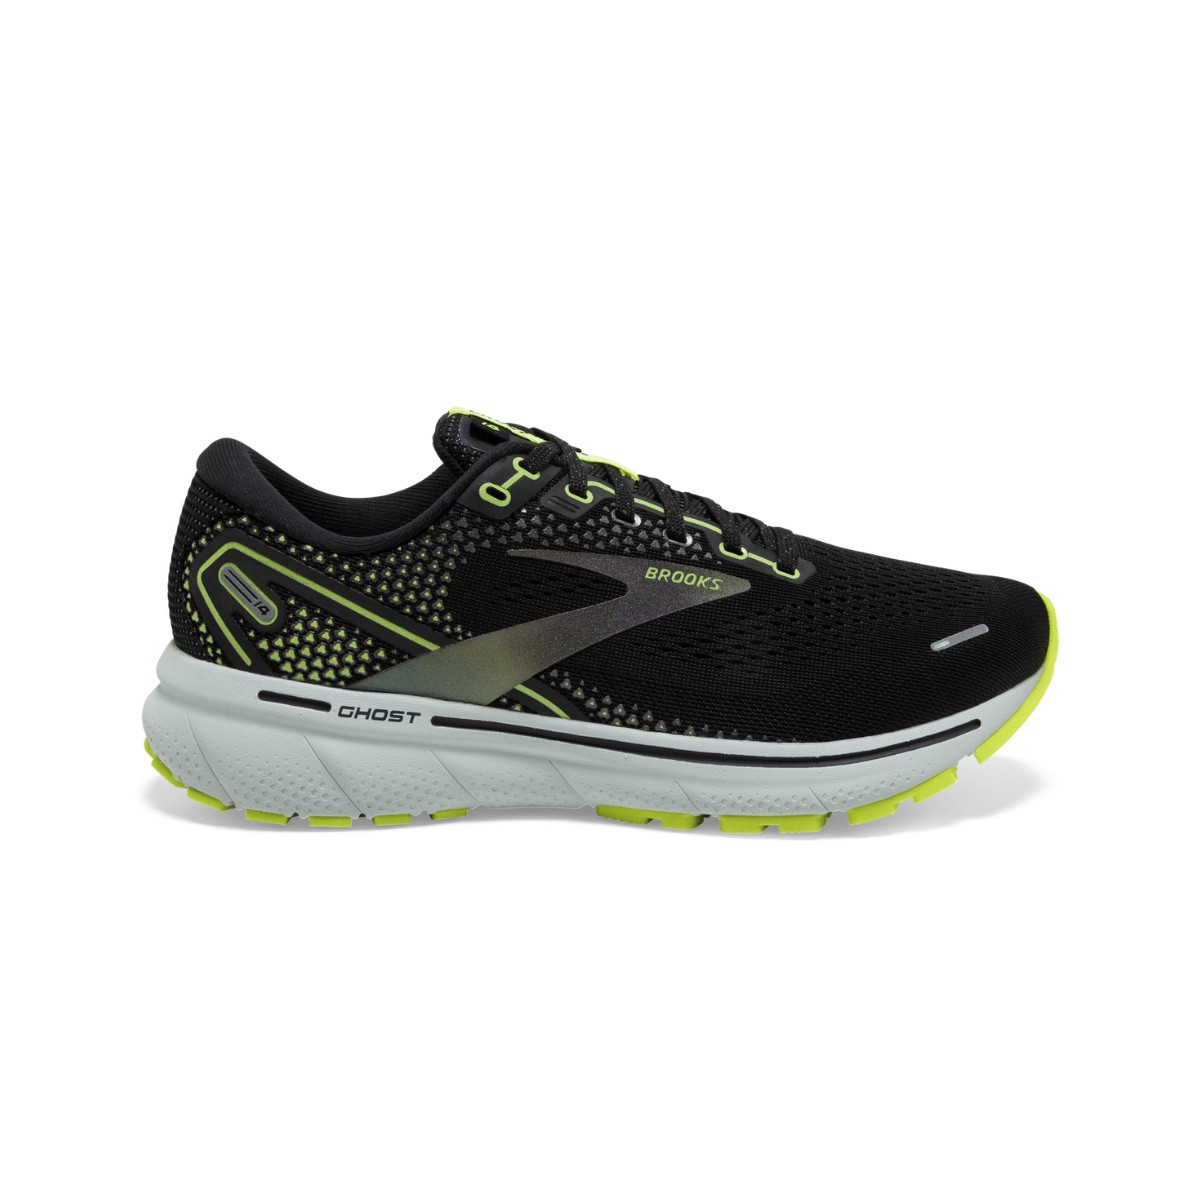 Chaussures Brooks Ghost 14 Noir Jaune AW21, Taille 42 - EUR